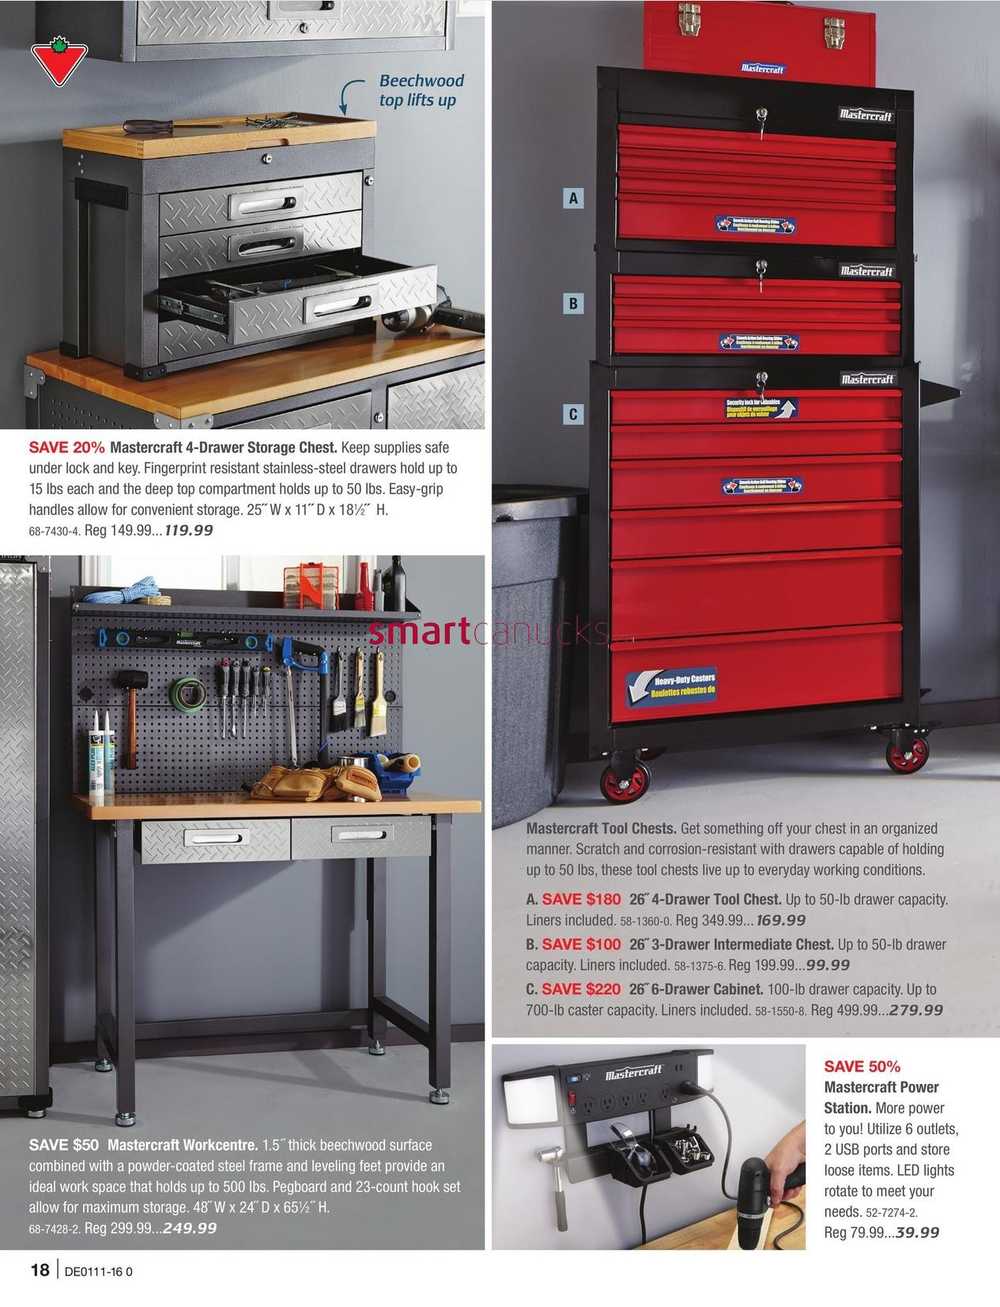 Canadian Tire Destination Home Catalogue March 11 To 31